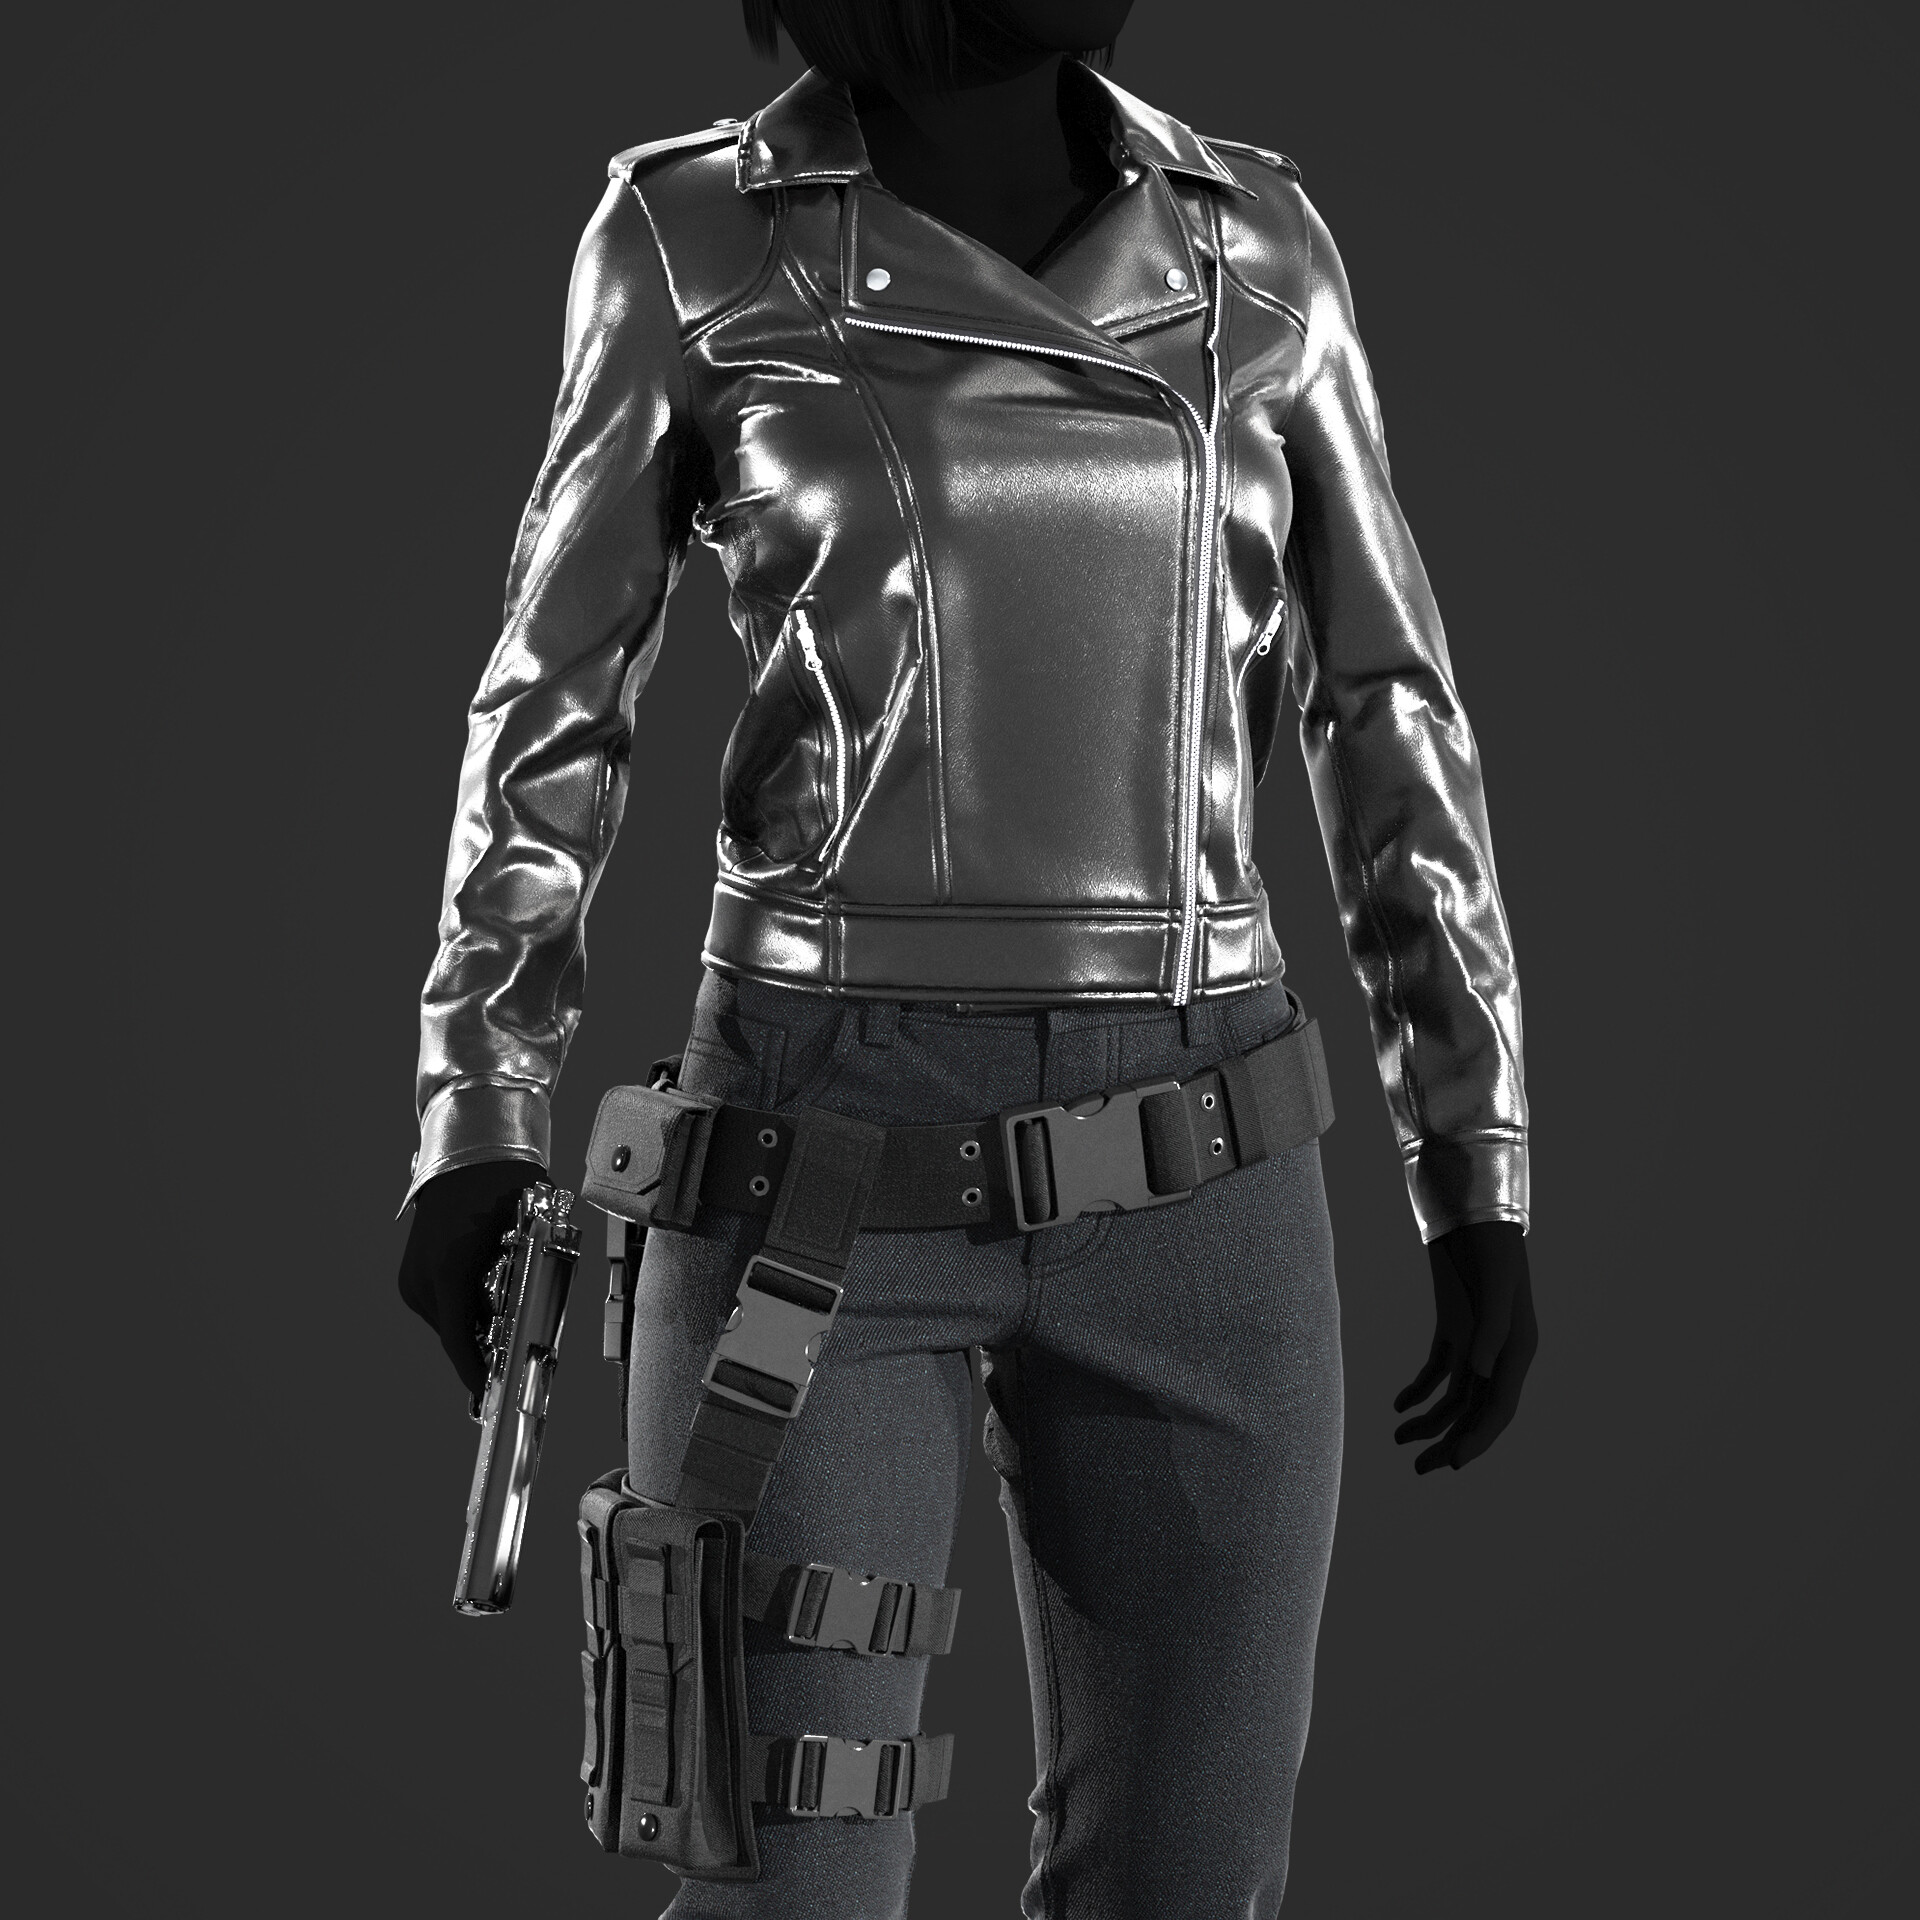 https://cdna.artstation.com/p/assets/covers/images/044/322/398/large/sergey-abuvalov-sergey-abuvalov-24-preview-female-tactical-outfit.jpg?1639669770